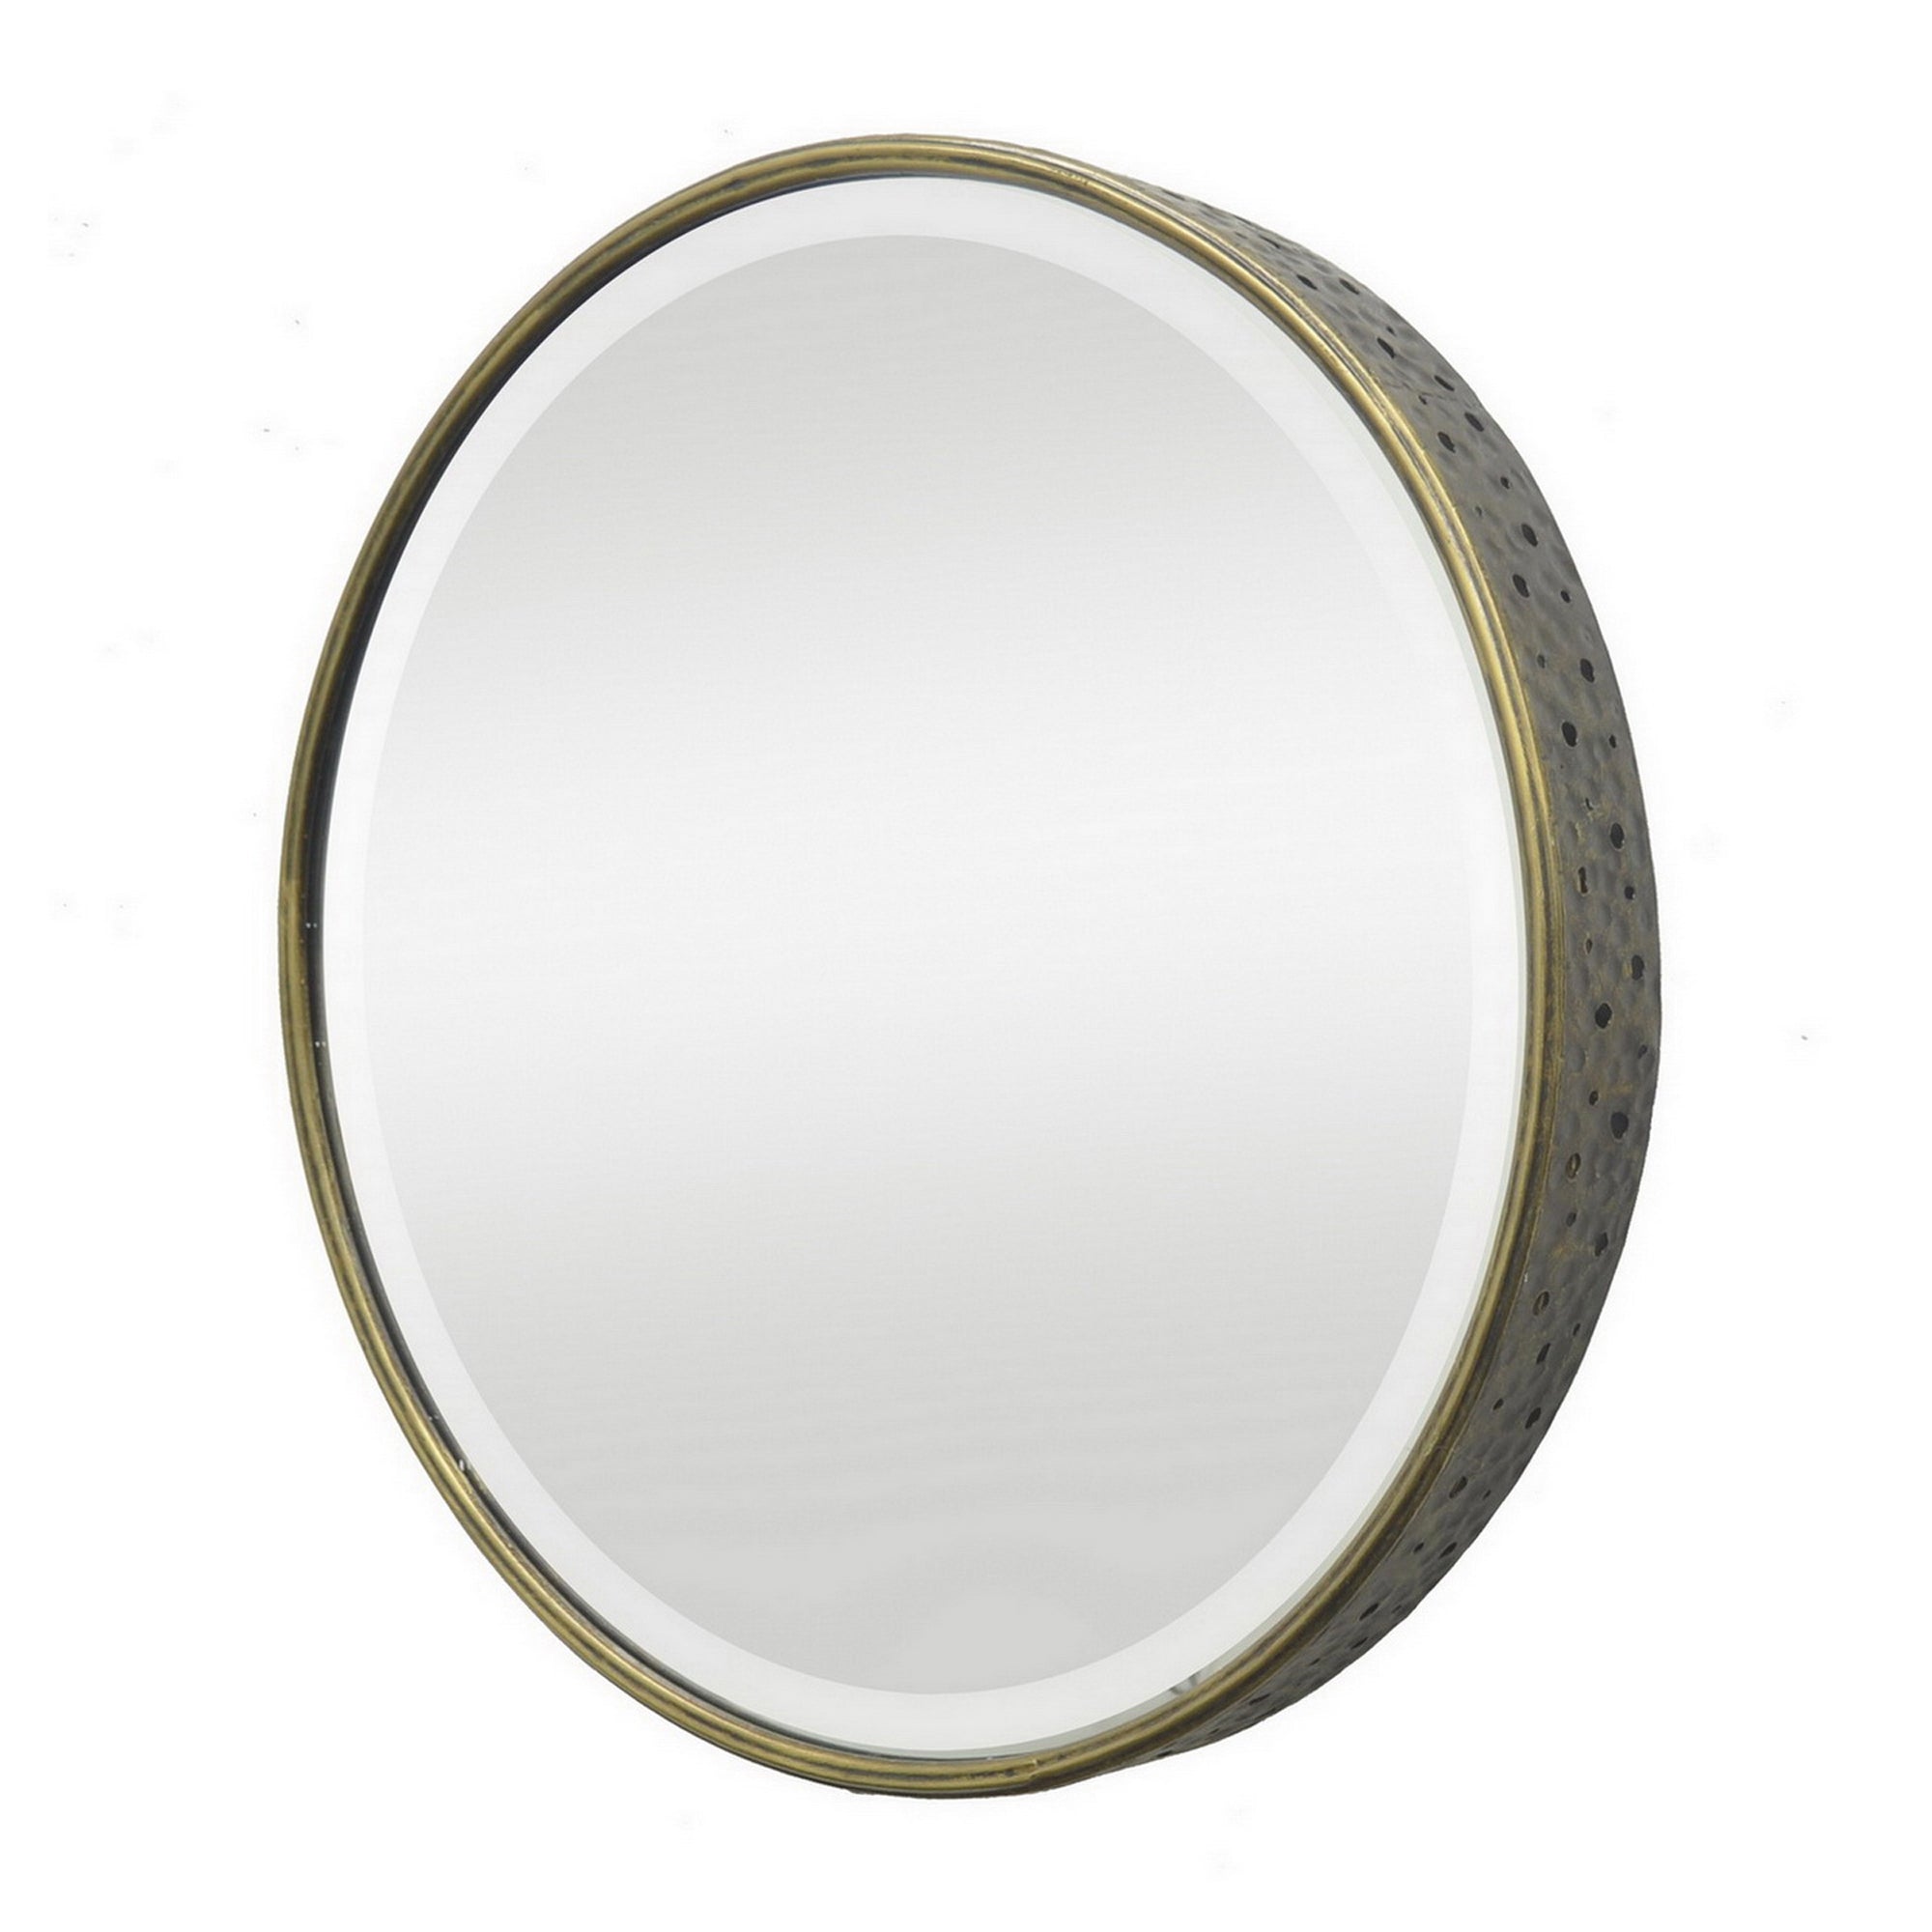 Vintage Round Metal Mirror with Gold Accents - 24-1/2-in